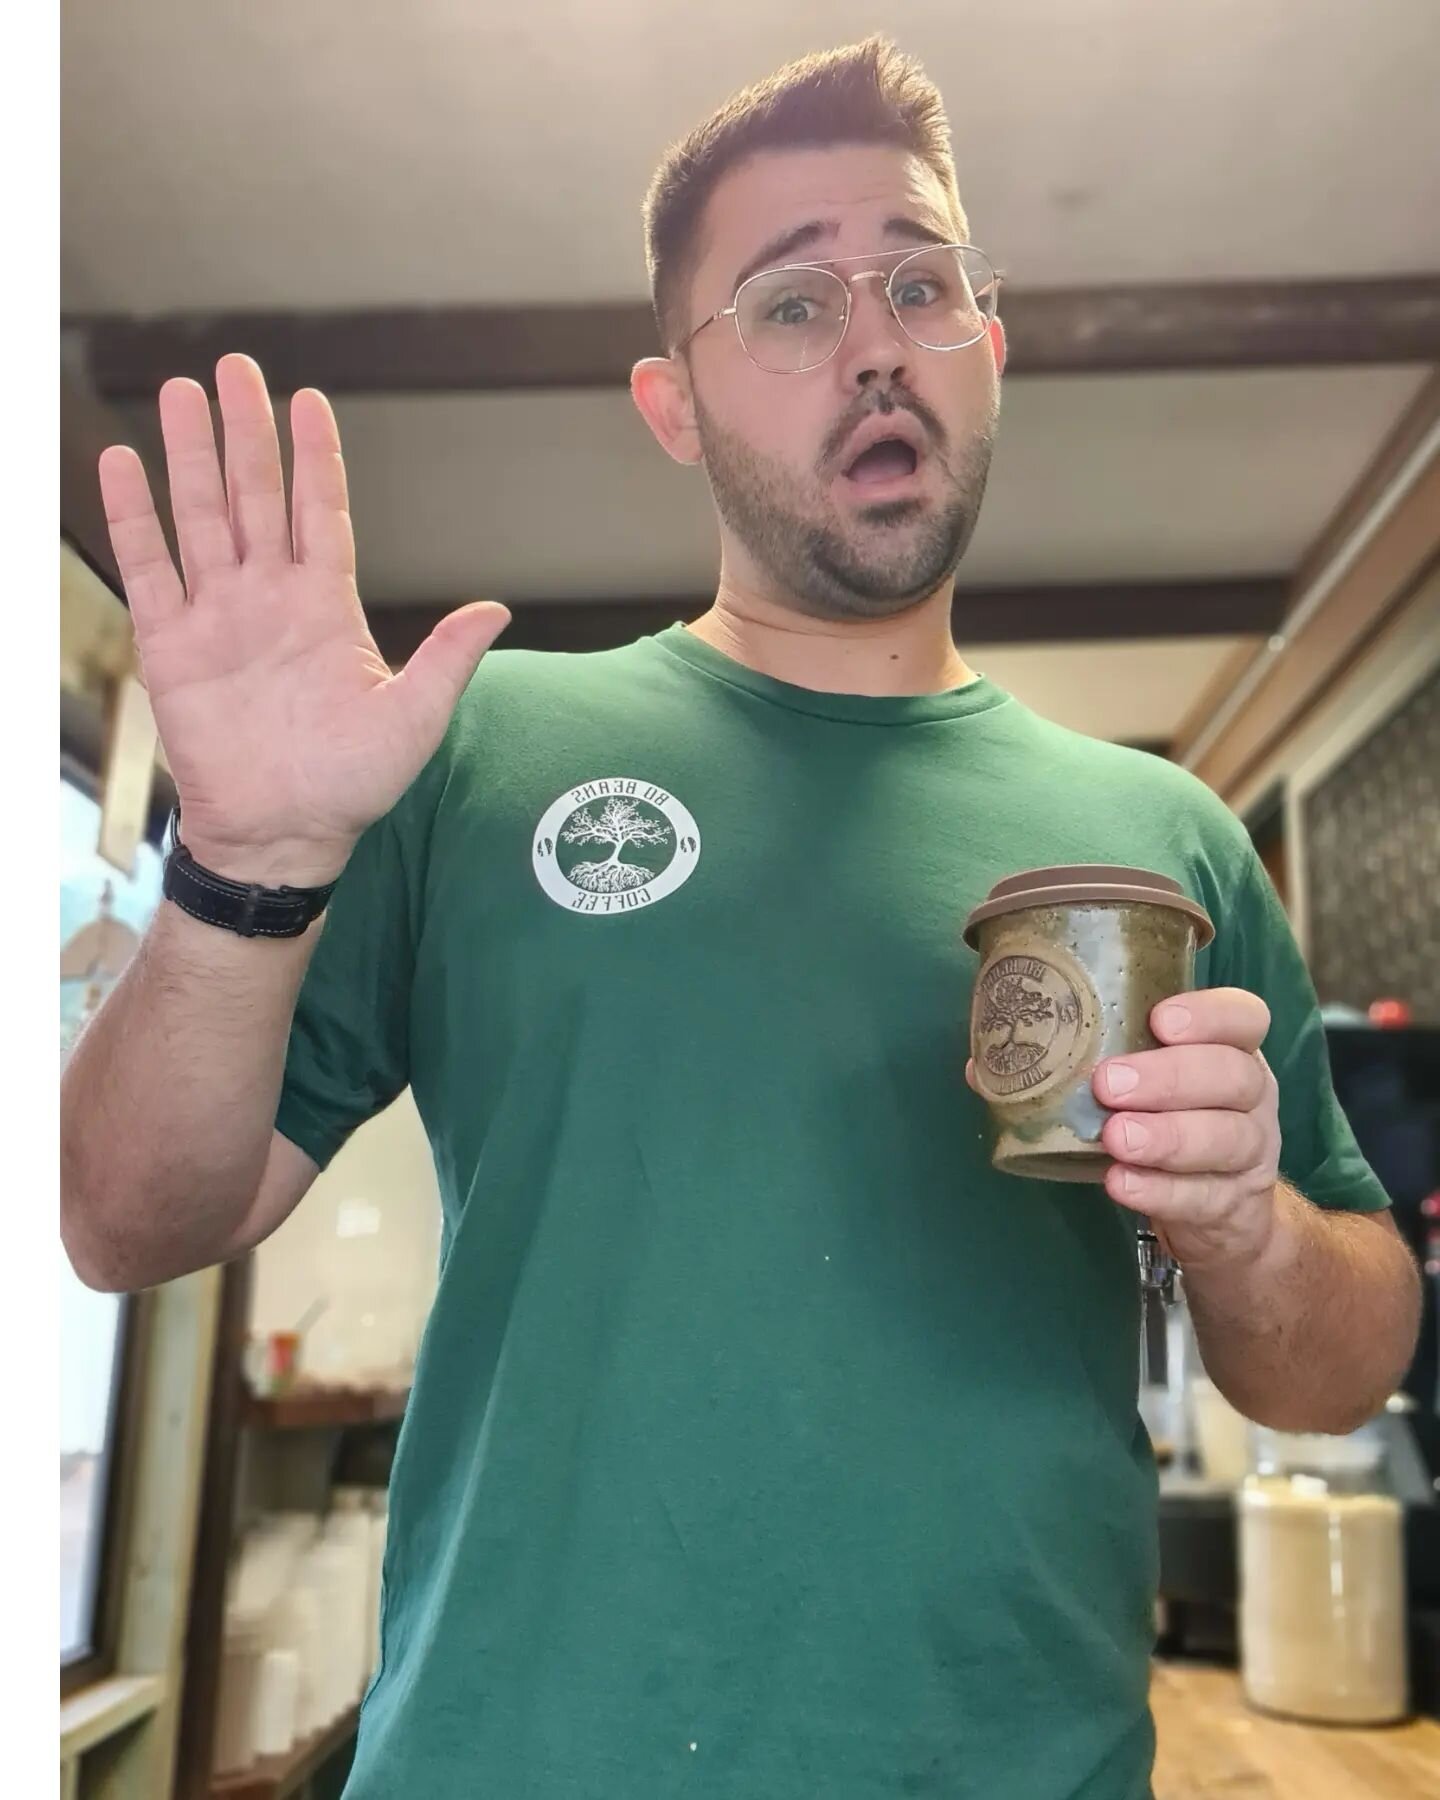 👋 Goodbye 👋

☕ Today is Bo's last day on the coffee machine before he heads off overseas ✈️

So why not drop by if you can, and wish him well 🙏

He'll be back in June, but no need to worry, business will continue as usual 😉

Only difference will 